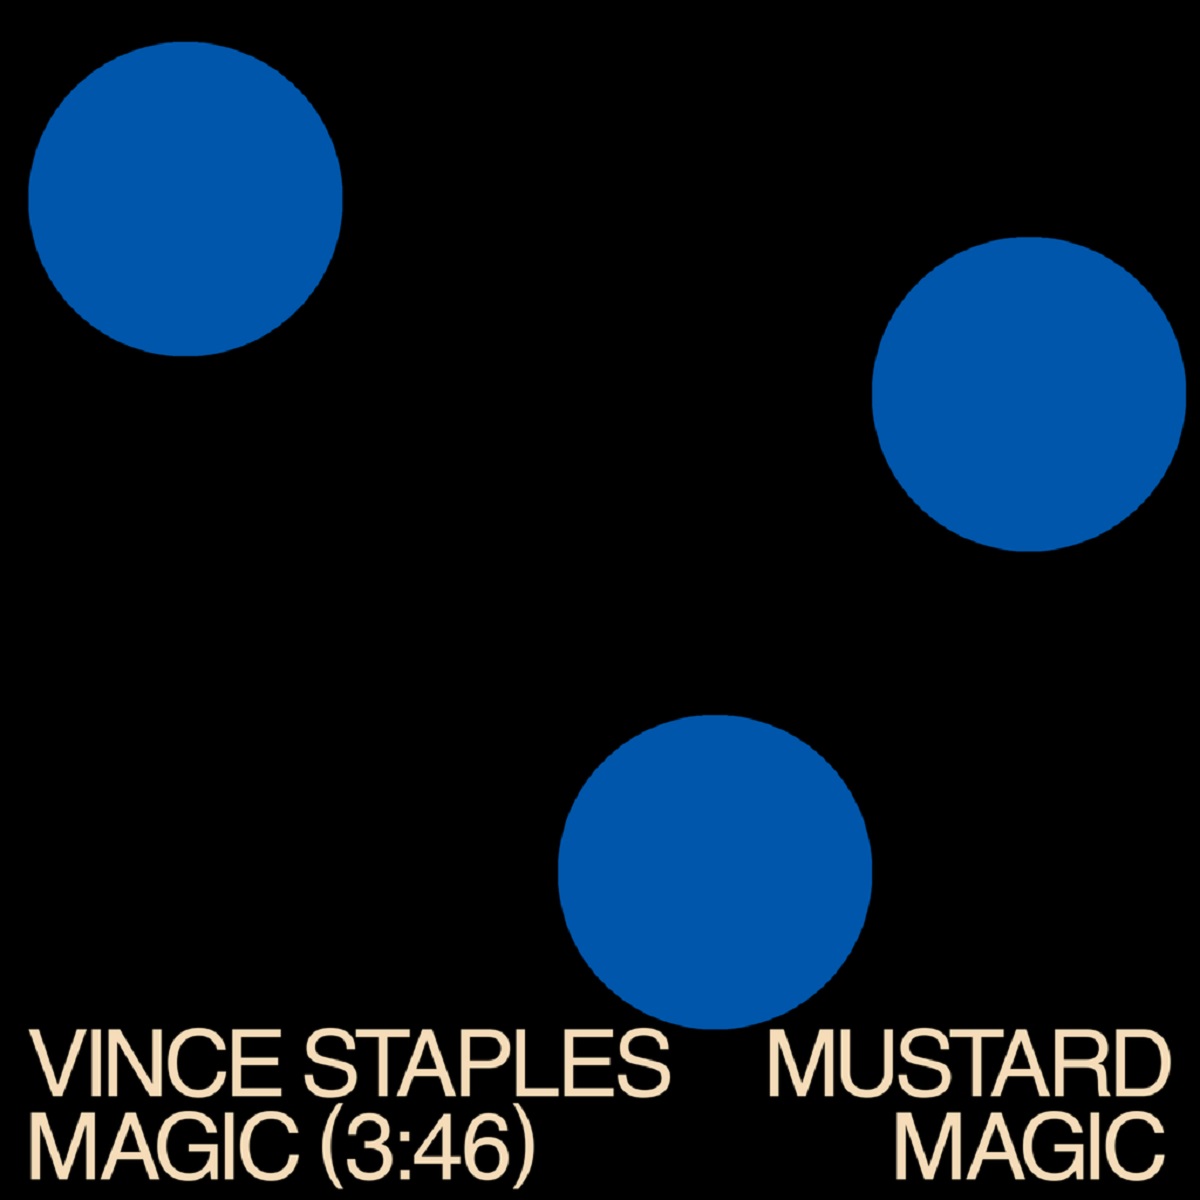 Vince Staples releases new single Magic with Mustard